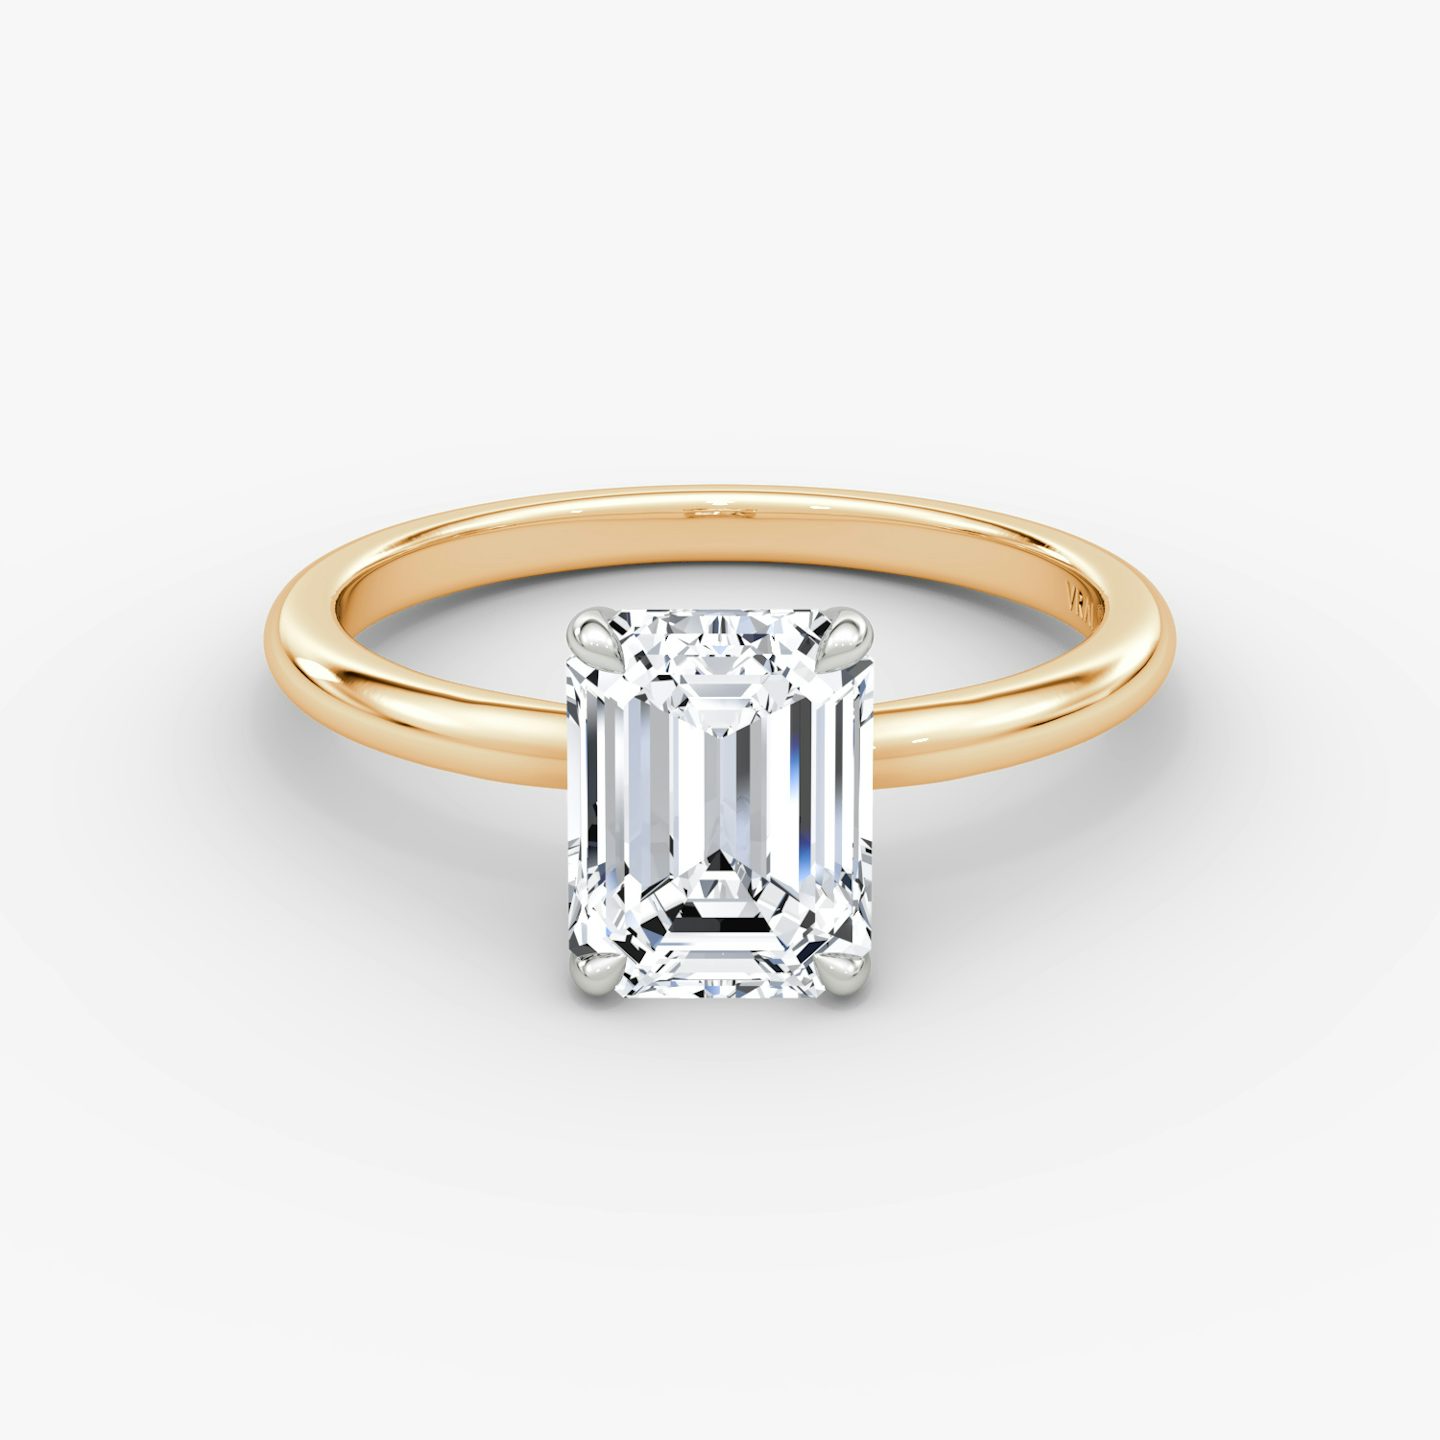 The Signature | Emerald | 14k | 14k Rose Gold and Platinum | Band: Plain | Band width: Standard | Setting style: Plain | Diamond orientation: vertical | Carat weight: See full inventory